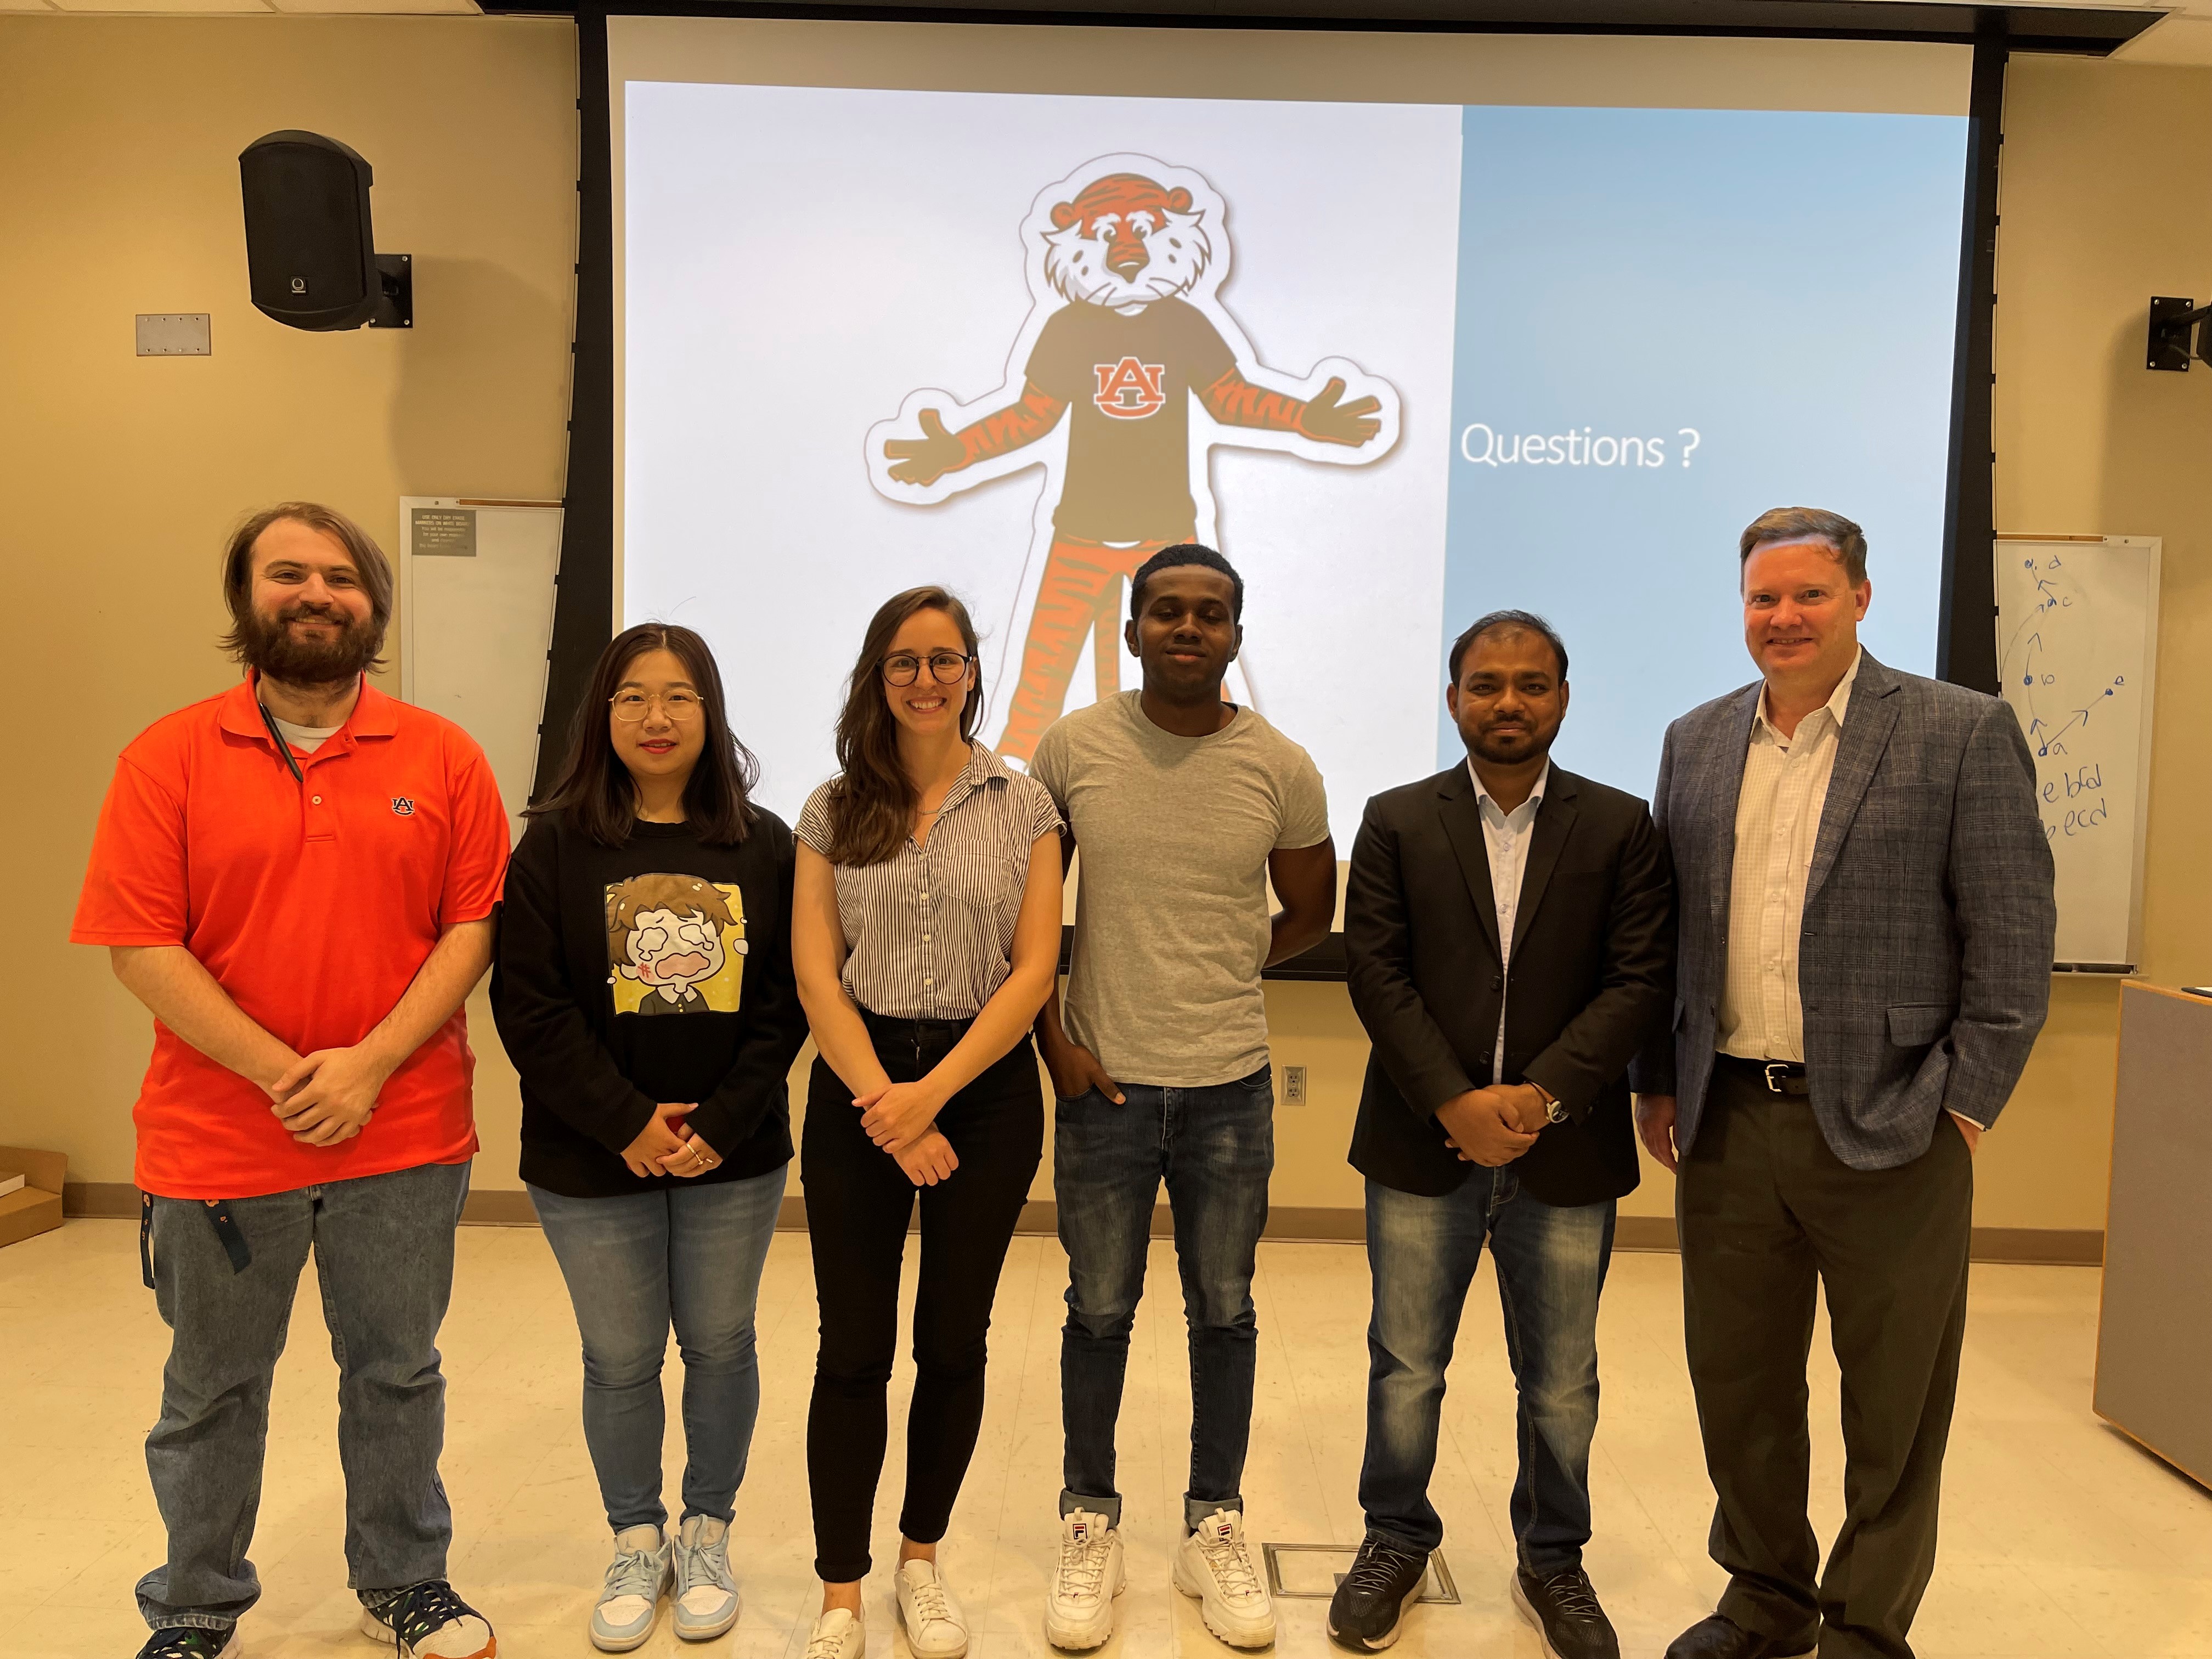 Left to right: Colby Muir, Yuyan Yi, Andresa Bezerra, Segun Obisesan, Md Riaz Uddin and Mark Liles at the the Graduate Student Research Forum.